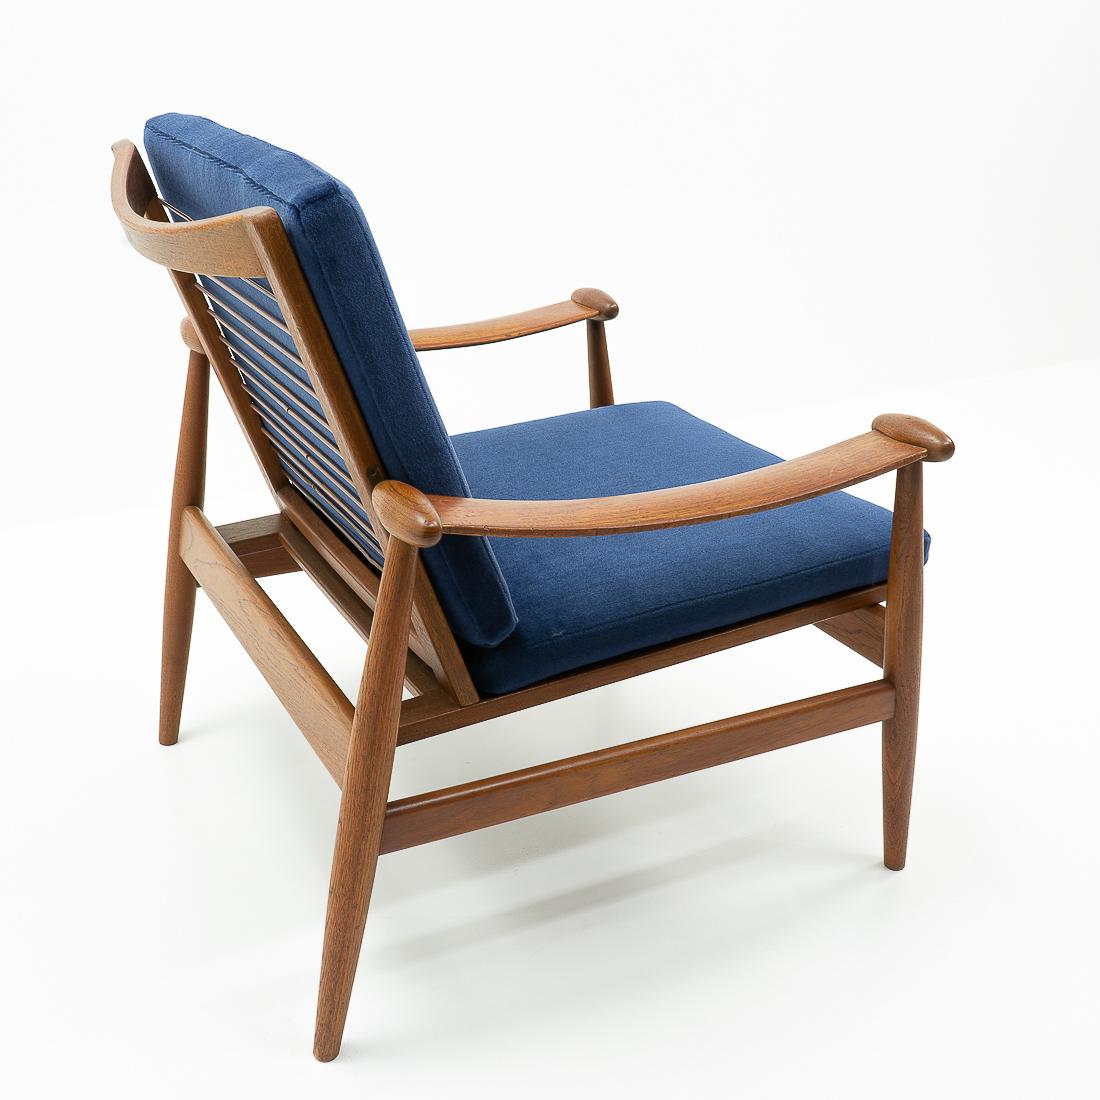 1950s Danish Design Classic Finn Juhl “Spade” Armchair, Upholstered in Mohair In Good Condition For Sale In Renens, CH